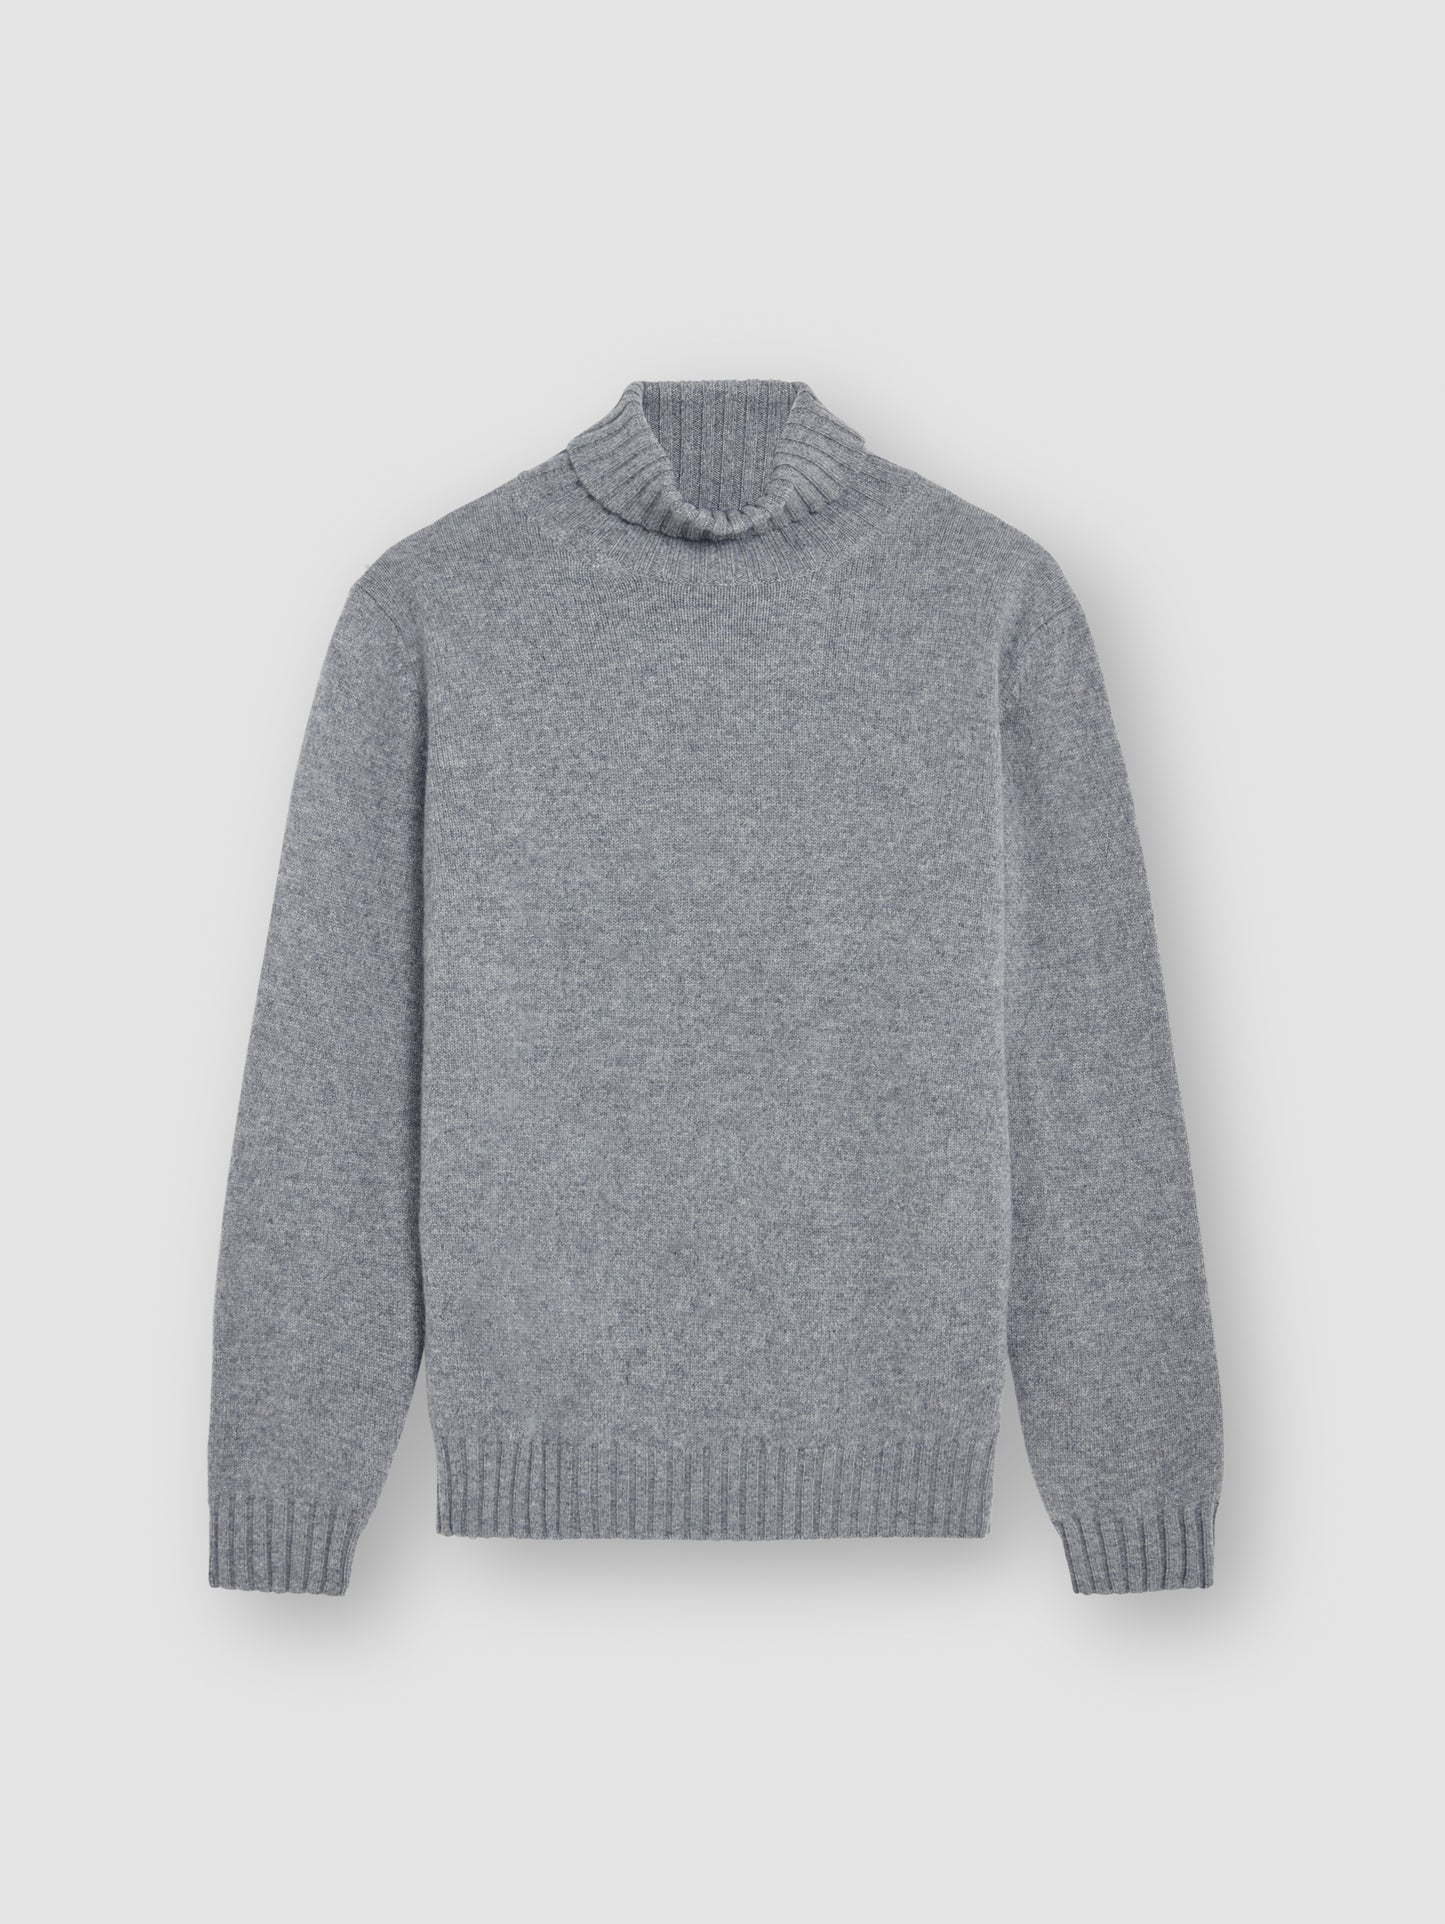 Cashmere Roll Neck Sweater Grey Product Image